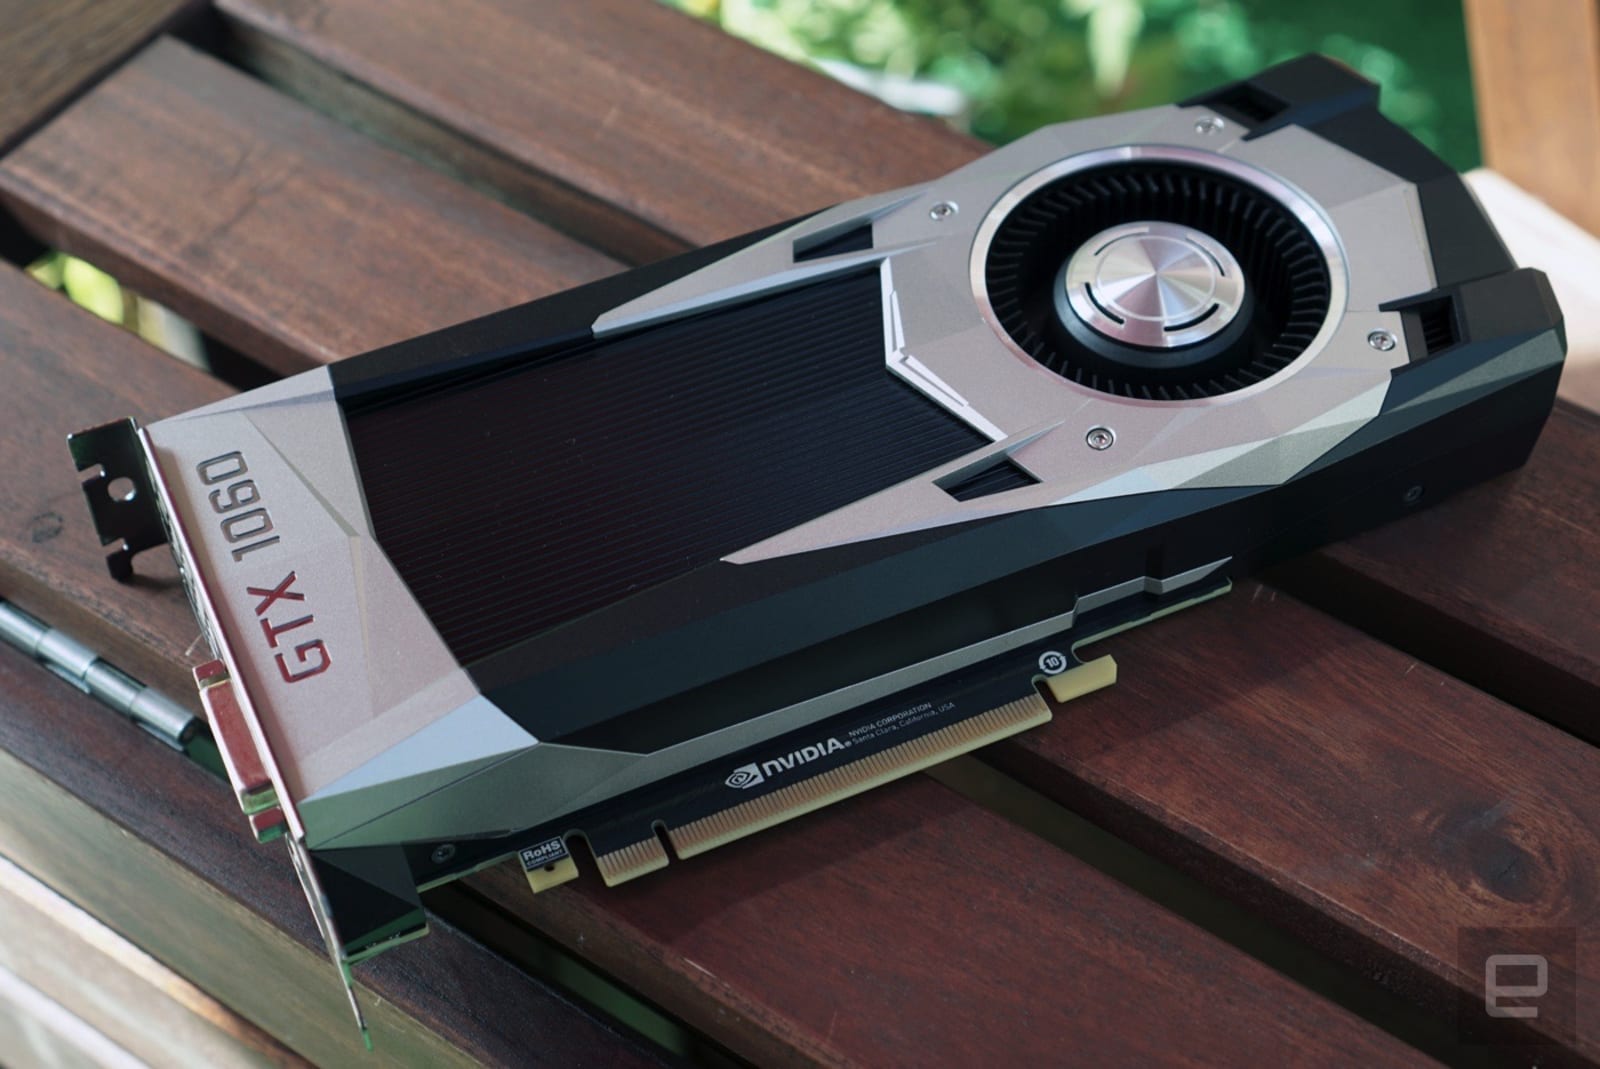 NVIDIA's GeForce GTX 1060 gives you gaming power on a budget